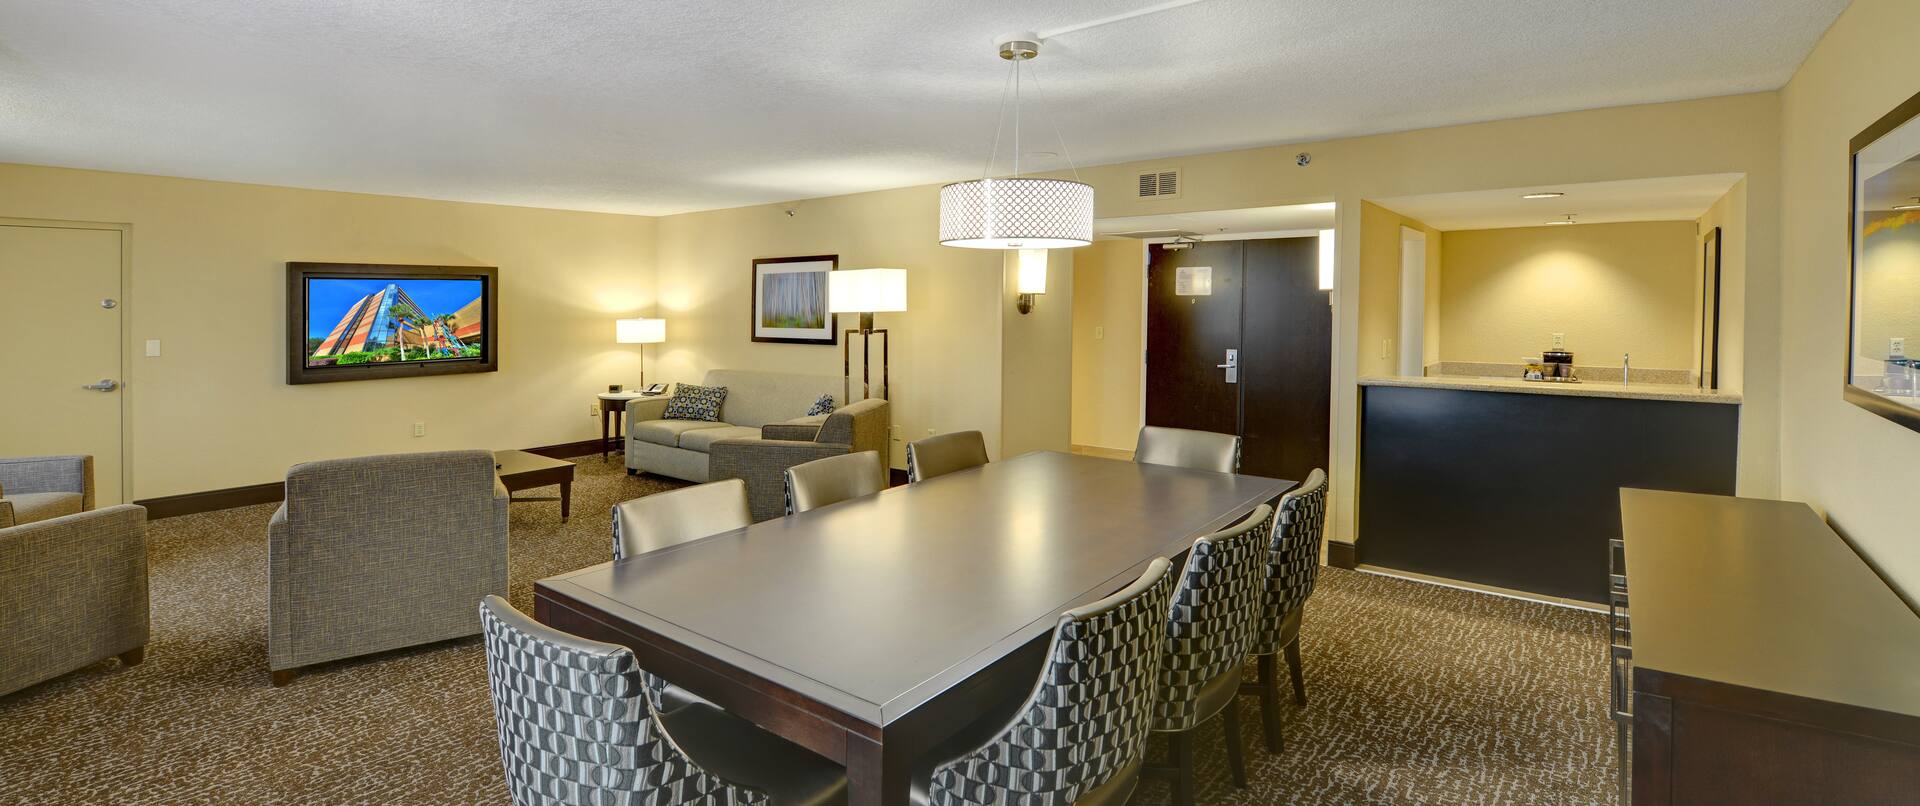 Guest Suite Lounge Area with Chairs, Table and Wall Mounted HDTV